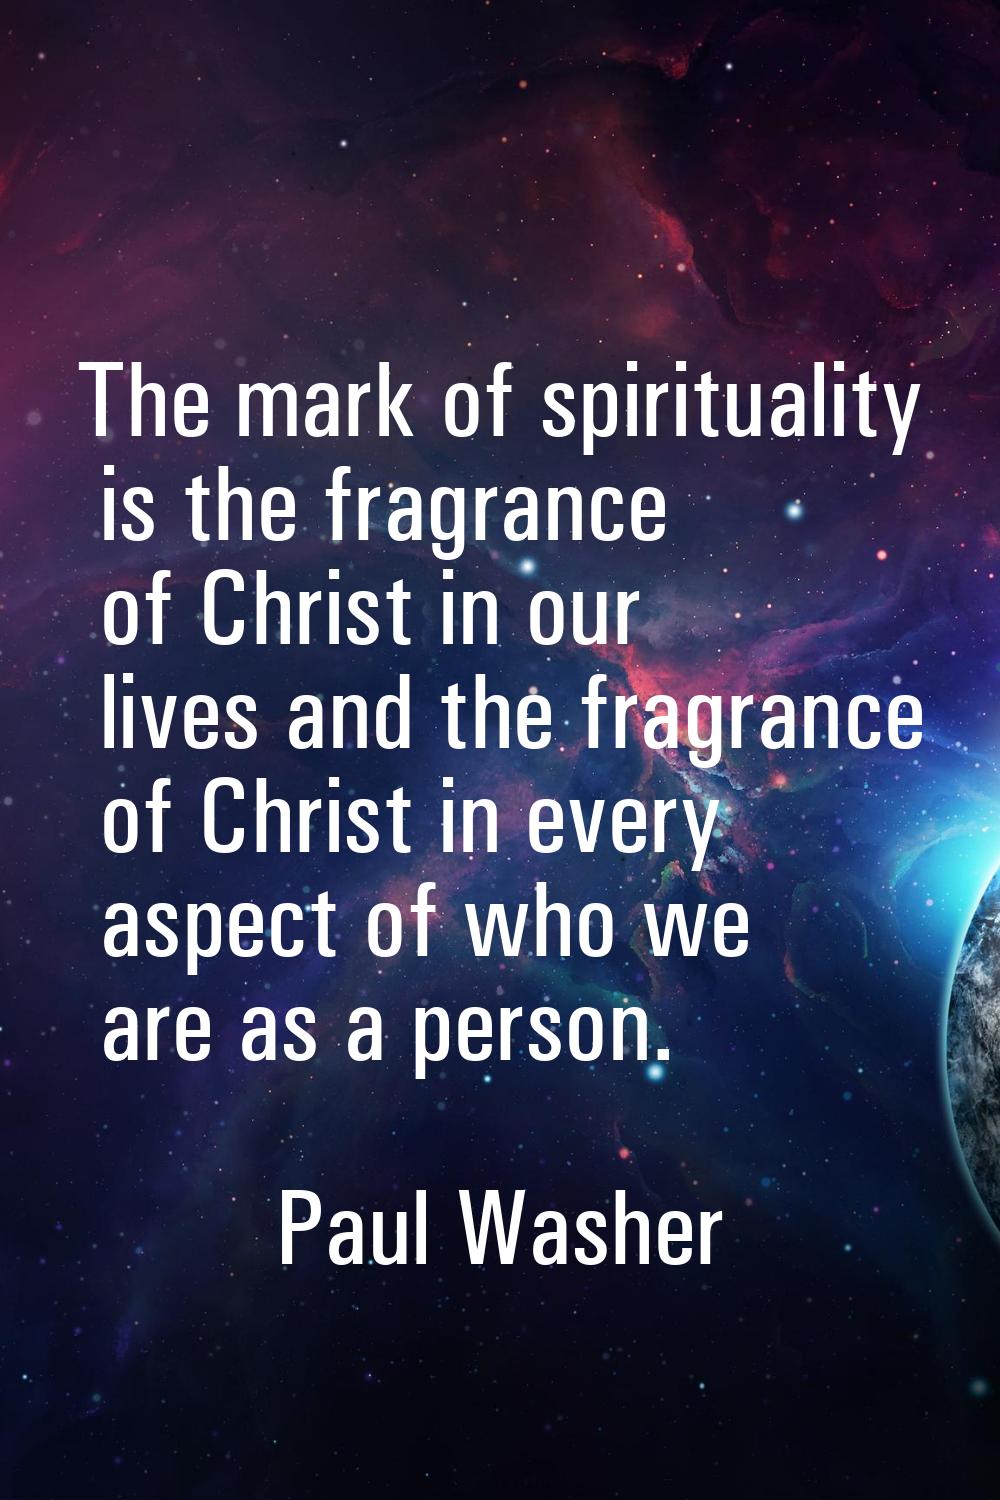 The mark of spirituality is the fragrance of Christ in our lives and the fragrance of Christ in eve